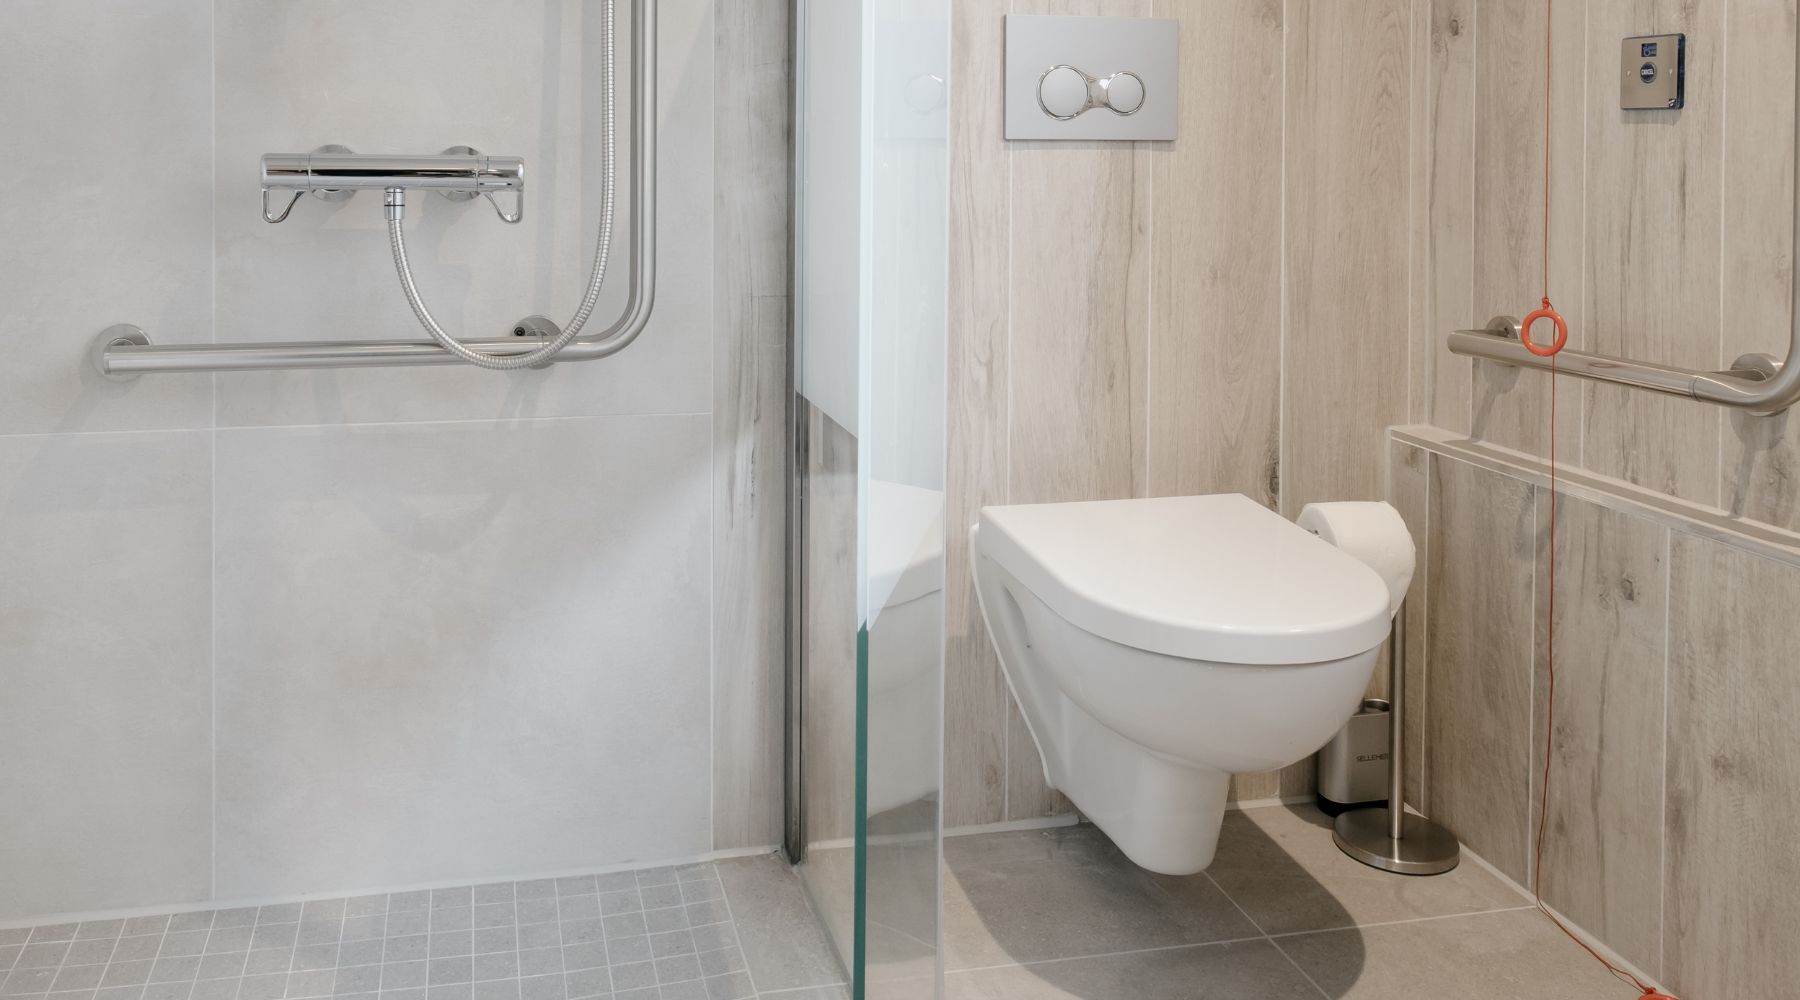 Trinity Lodge future-proofed, accessible apartment wetroom/bathroom featuring toilet, supportive L-shaped shower riser, grab rails and emergency pull cord 